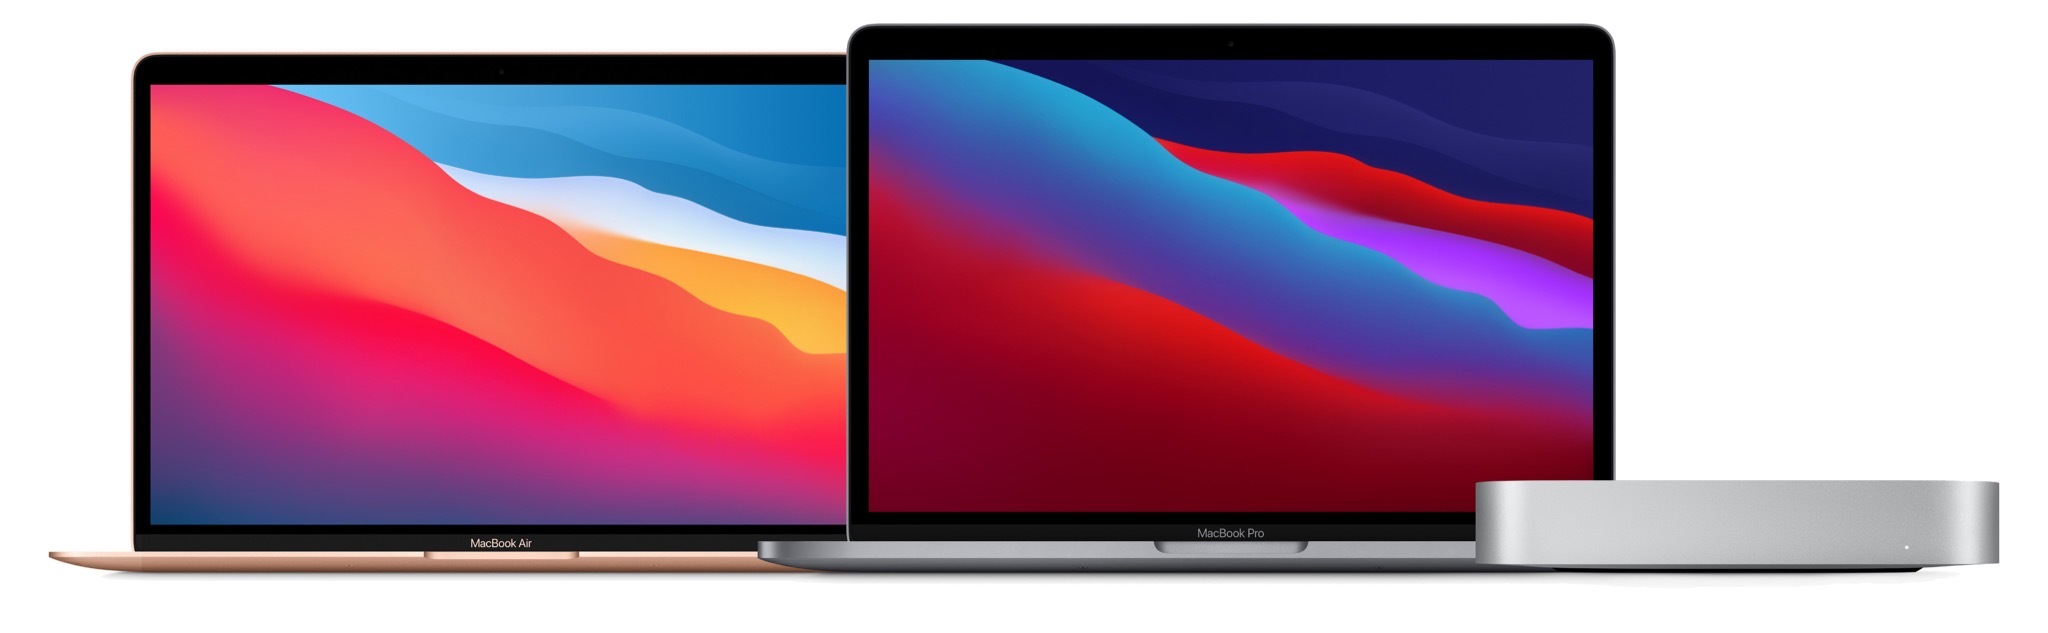 Why is everyone so excited about the M1 MacBooks?